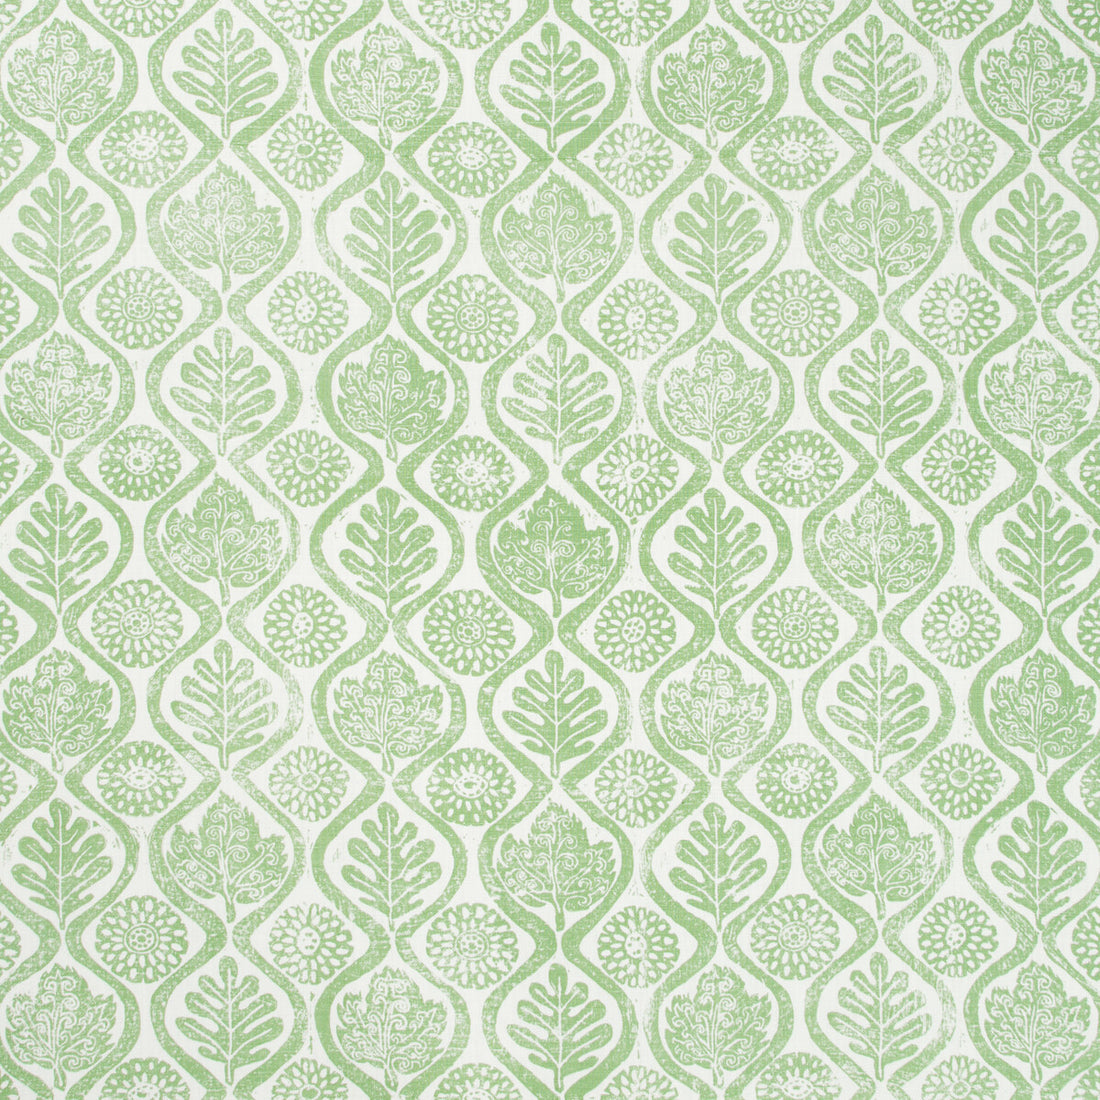 Oakleaves fabric in forest color - pattern BFC-3514.2.0 - by Lee Jofa in the Blithfield collection